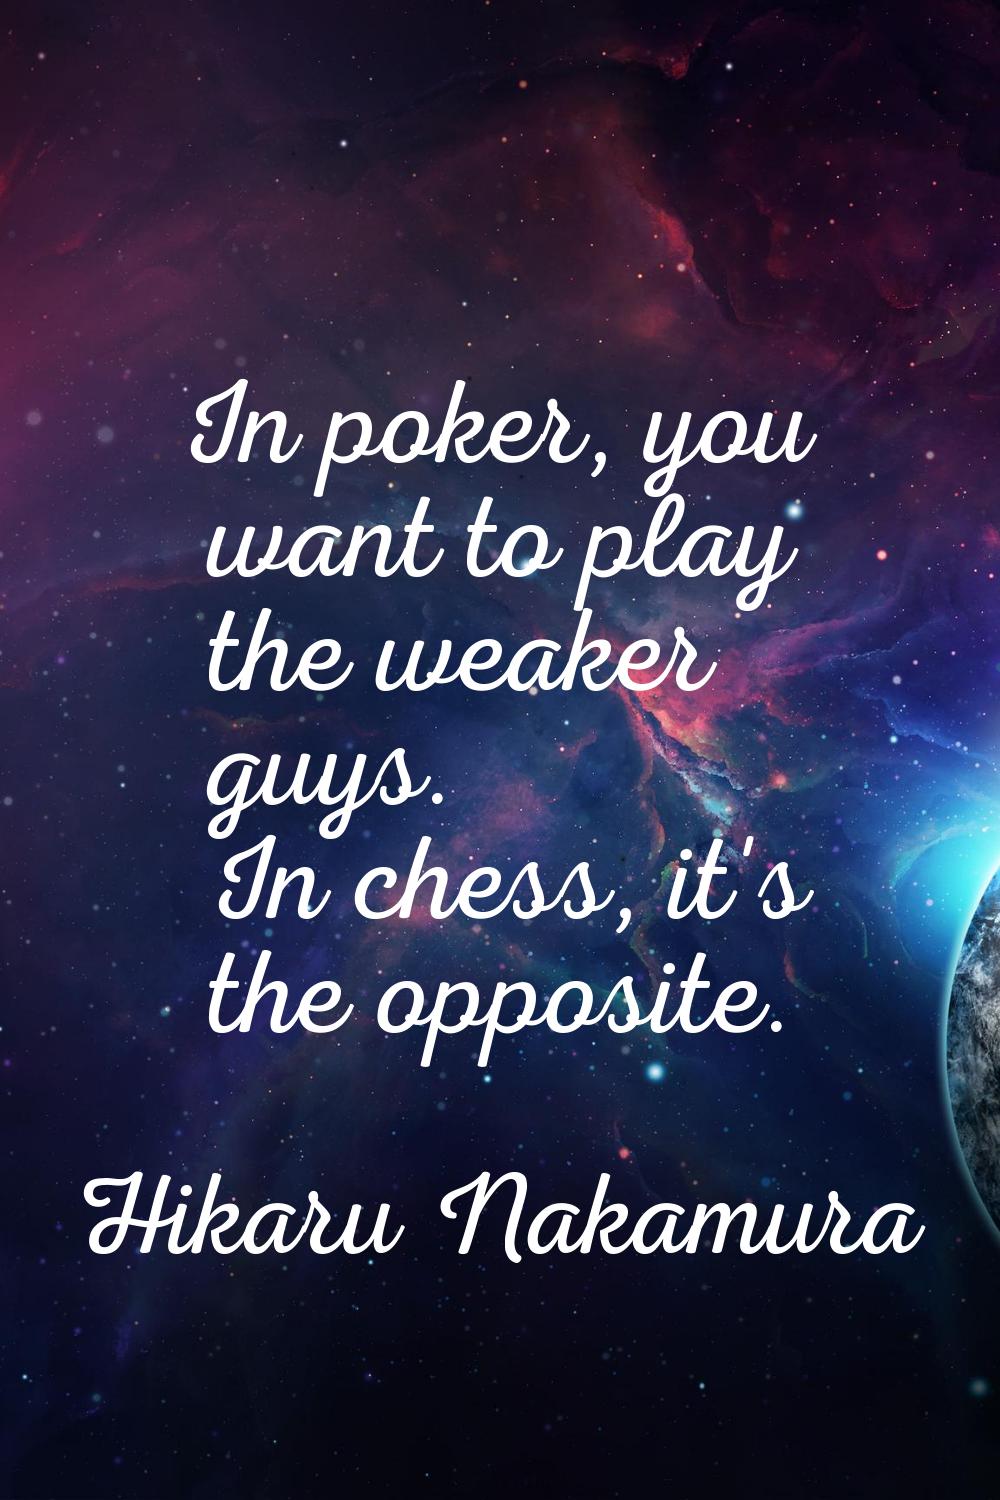 In poker, you want to play the weaker guys. In chess, it's the opposite.